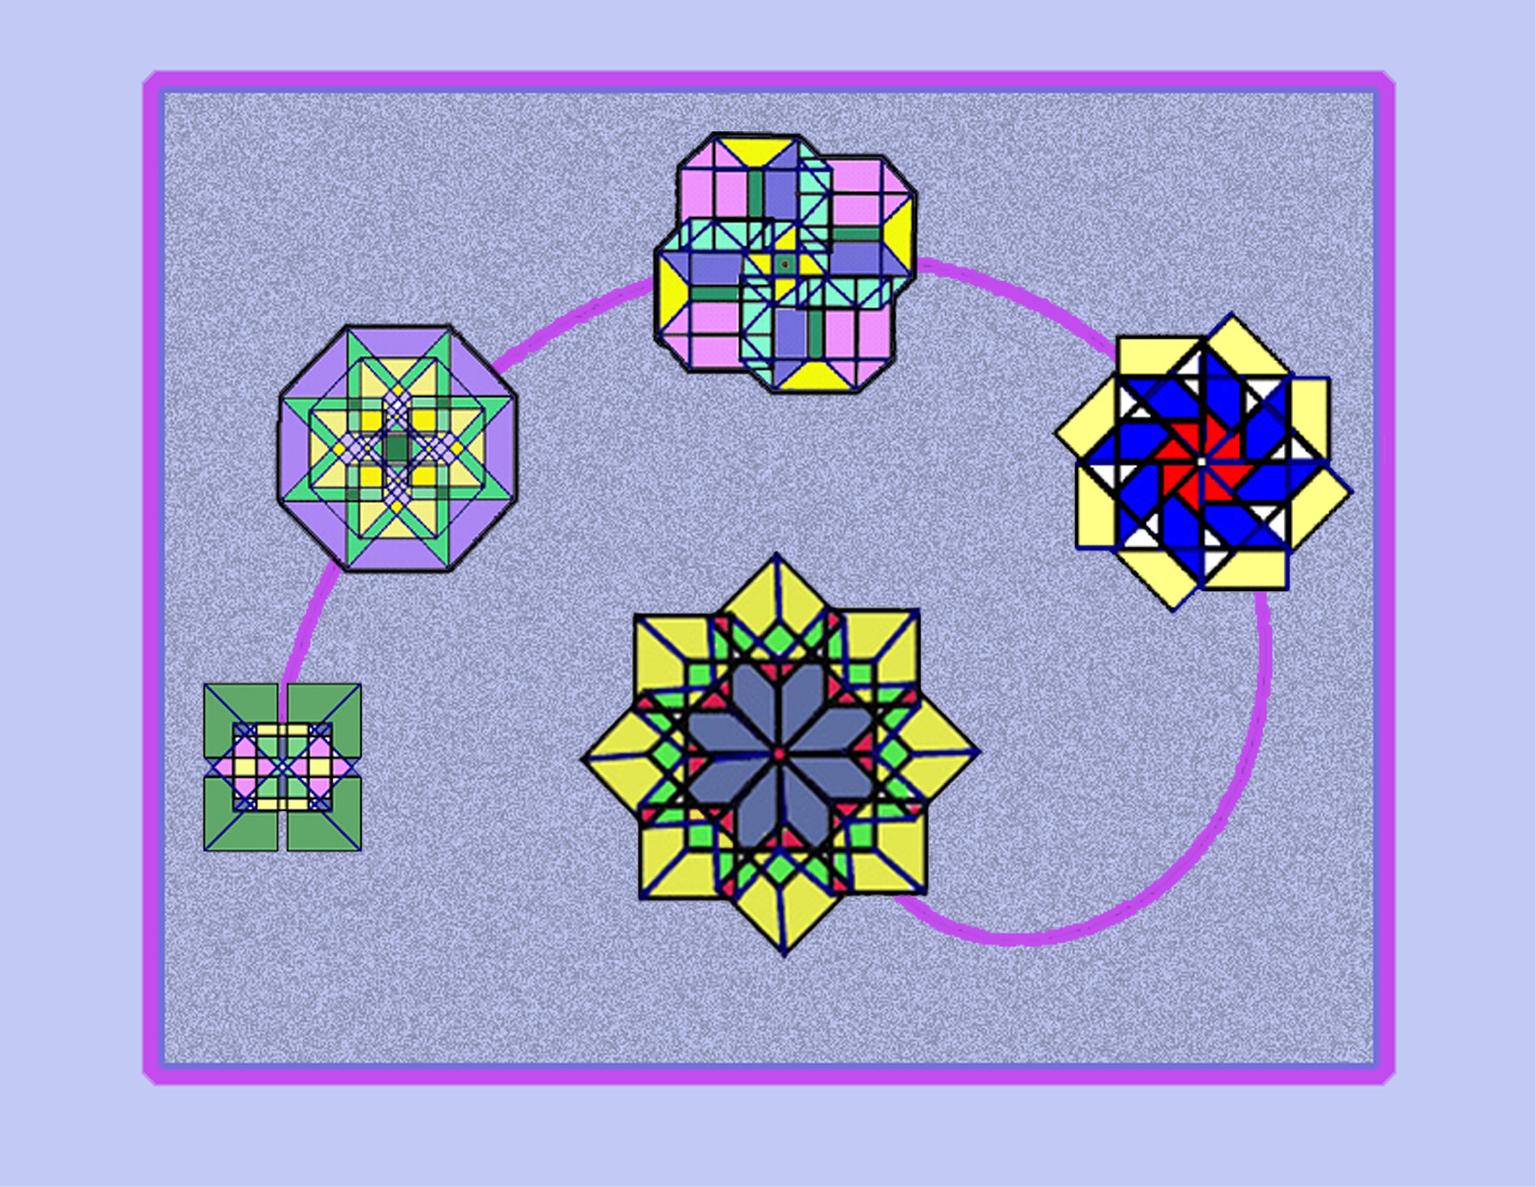 Image for entry 'Spiral Hypercubes'